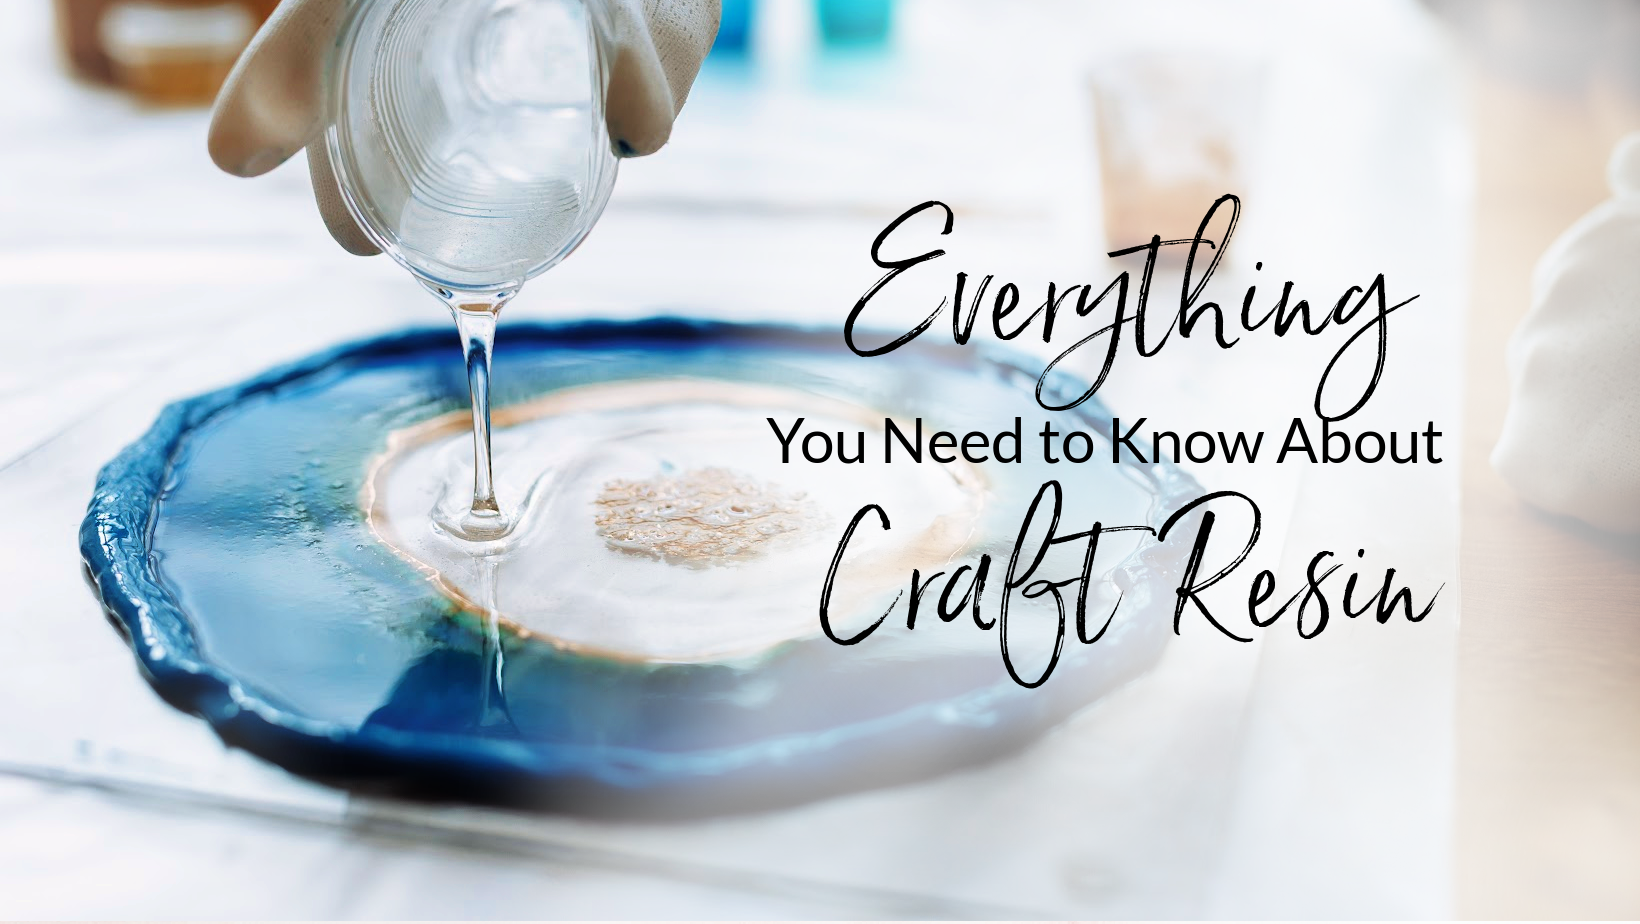 Epoxy Resin 101 – Everything You Need to Know About Craft Resin